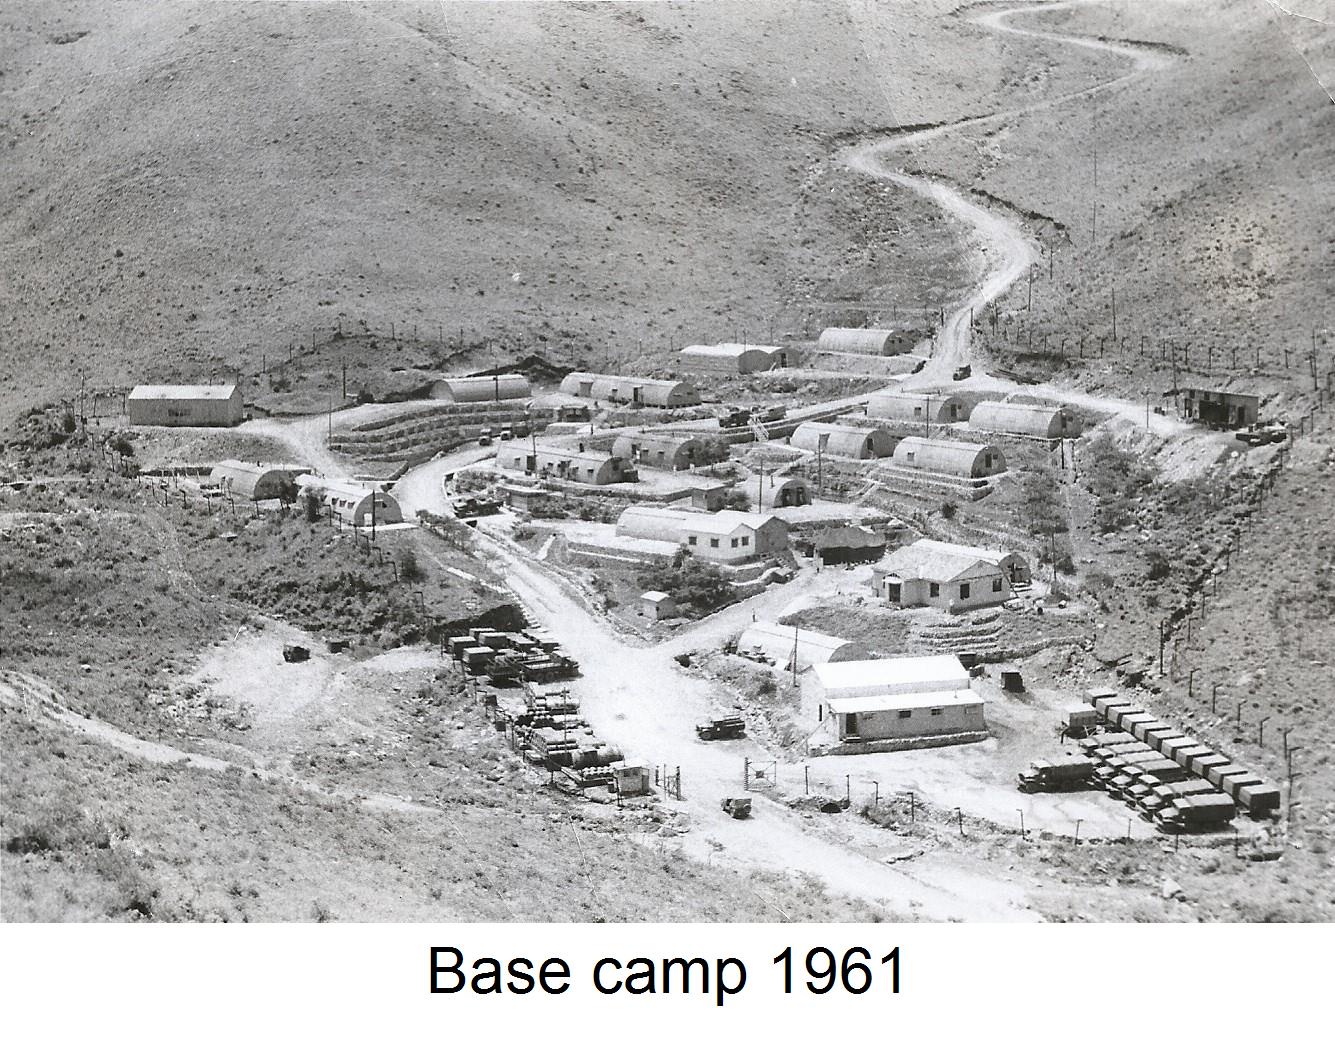 Lower Compound and Road to Topside, 1967